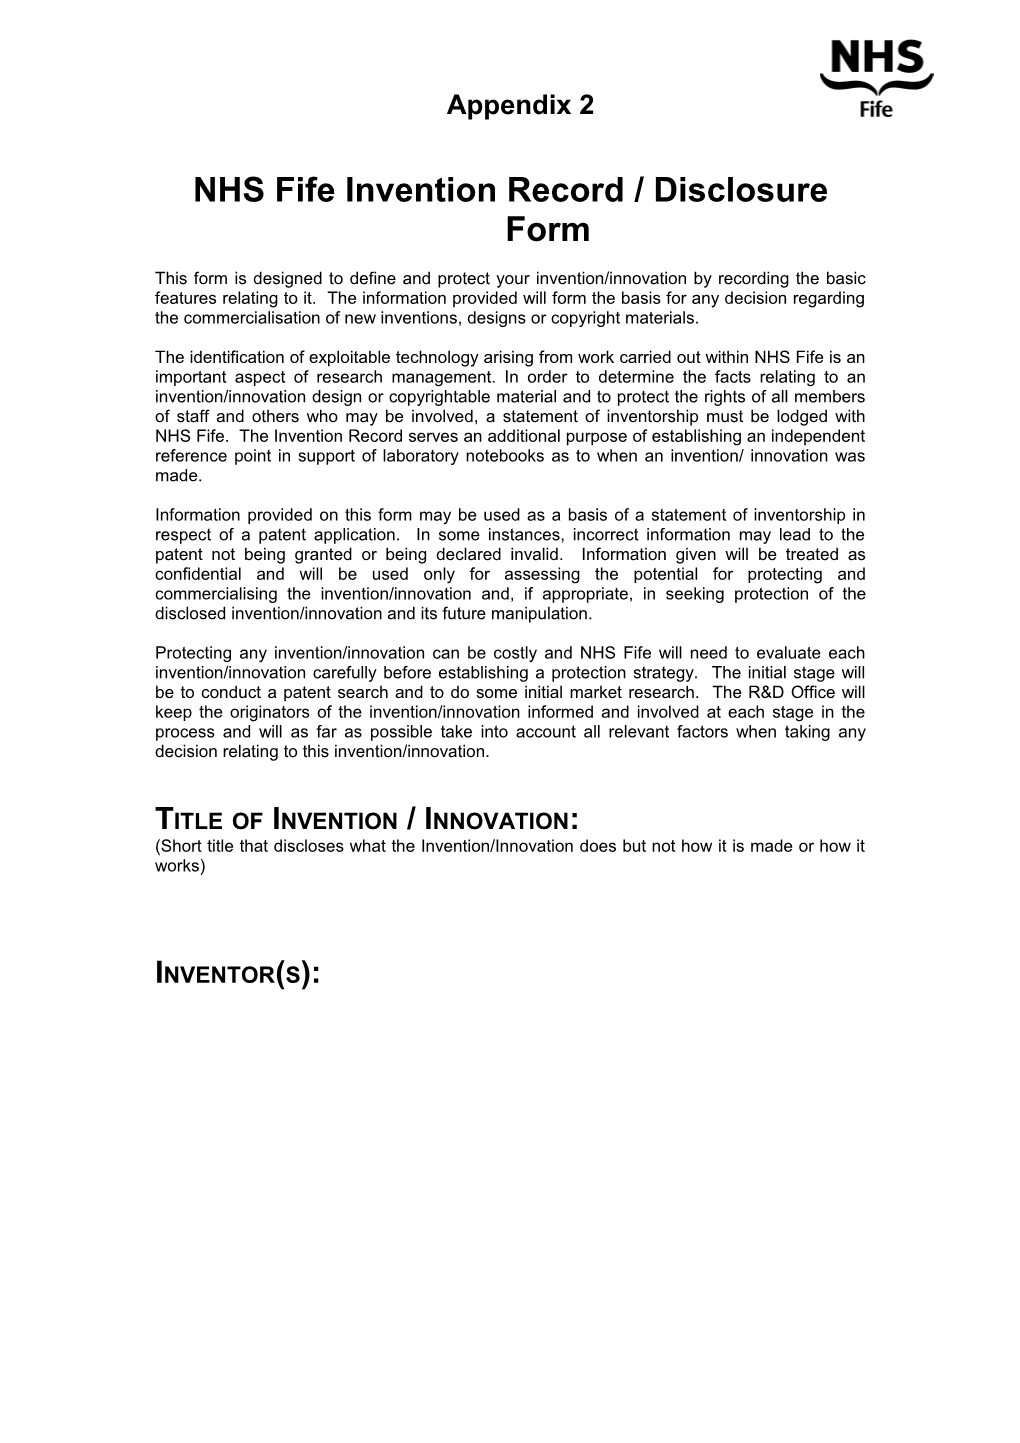 NHS Fife Invention Record / Disclosure Form